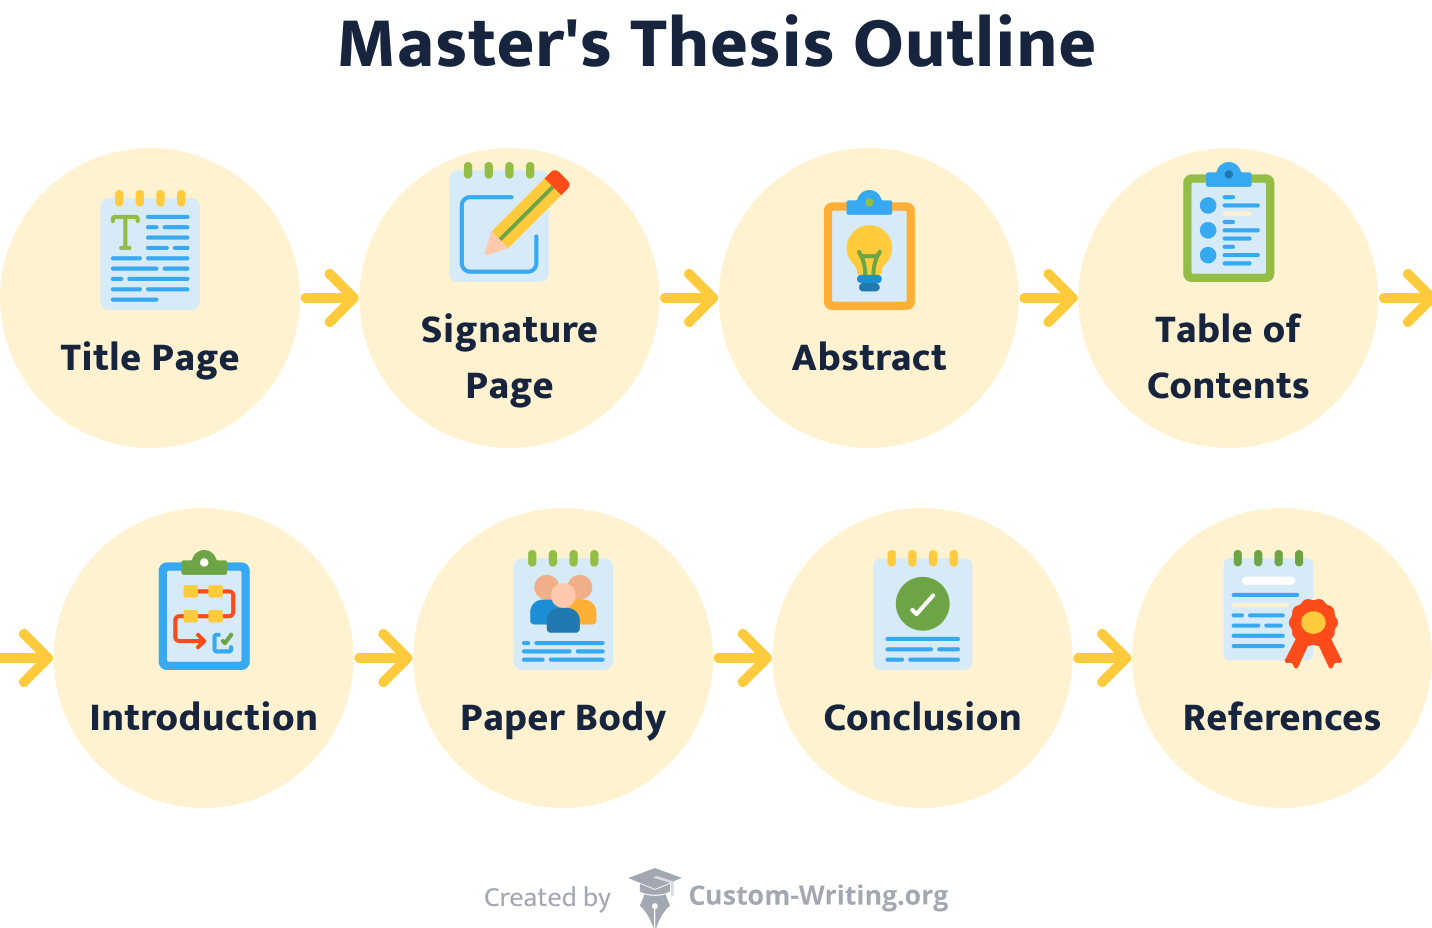 writing your master's thesis